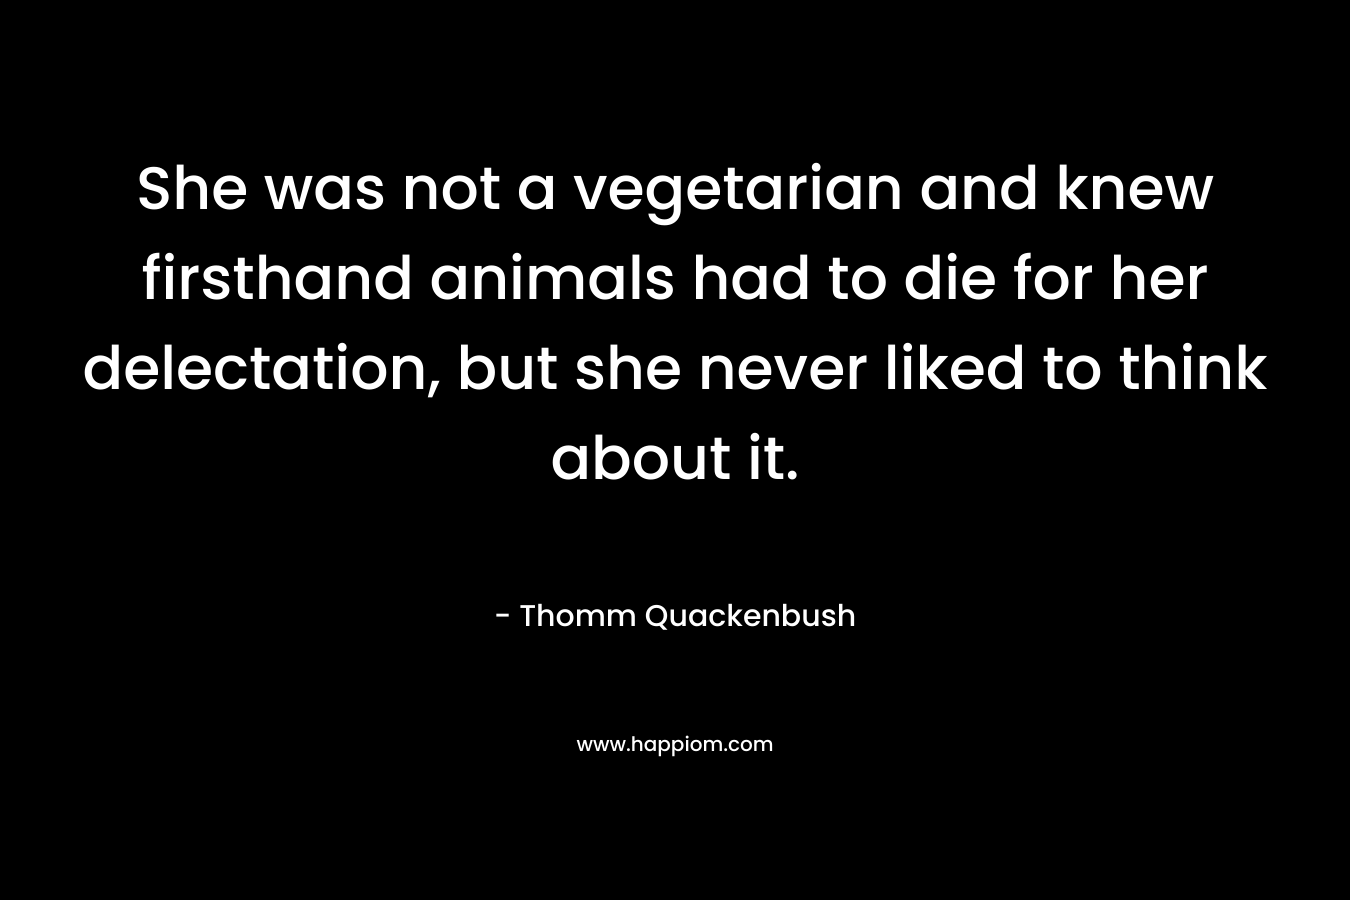 She was not a vegetarian and knew firsthand animals had to die for her delectation, but she never liked to think about it. – Thomm Quackenbush